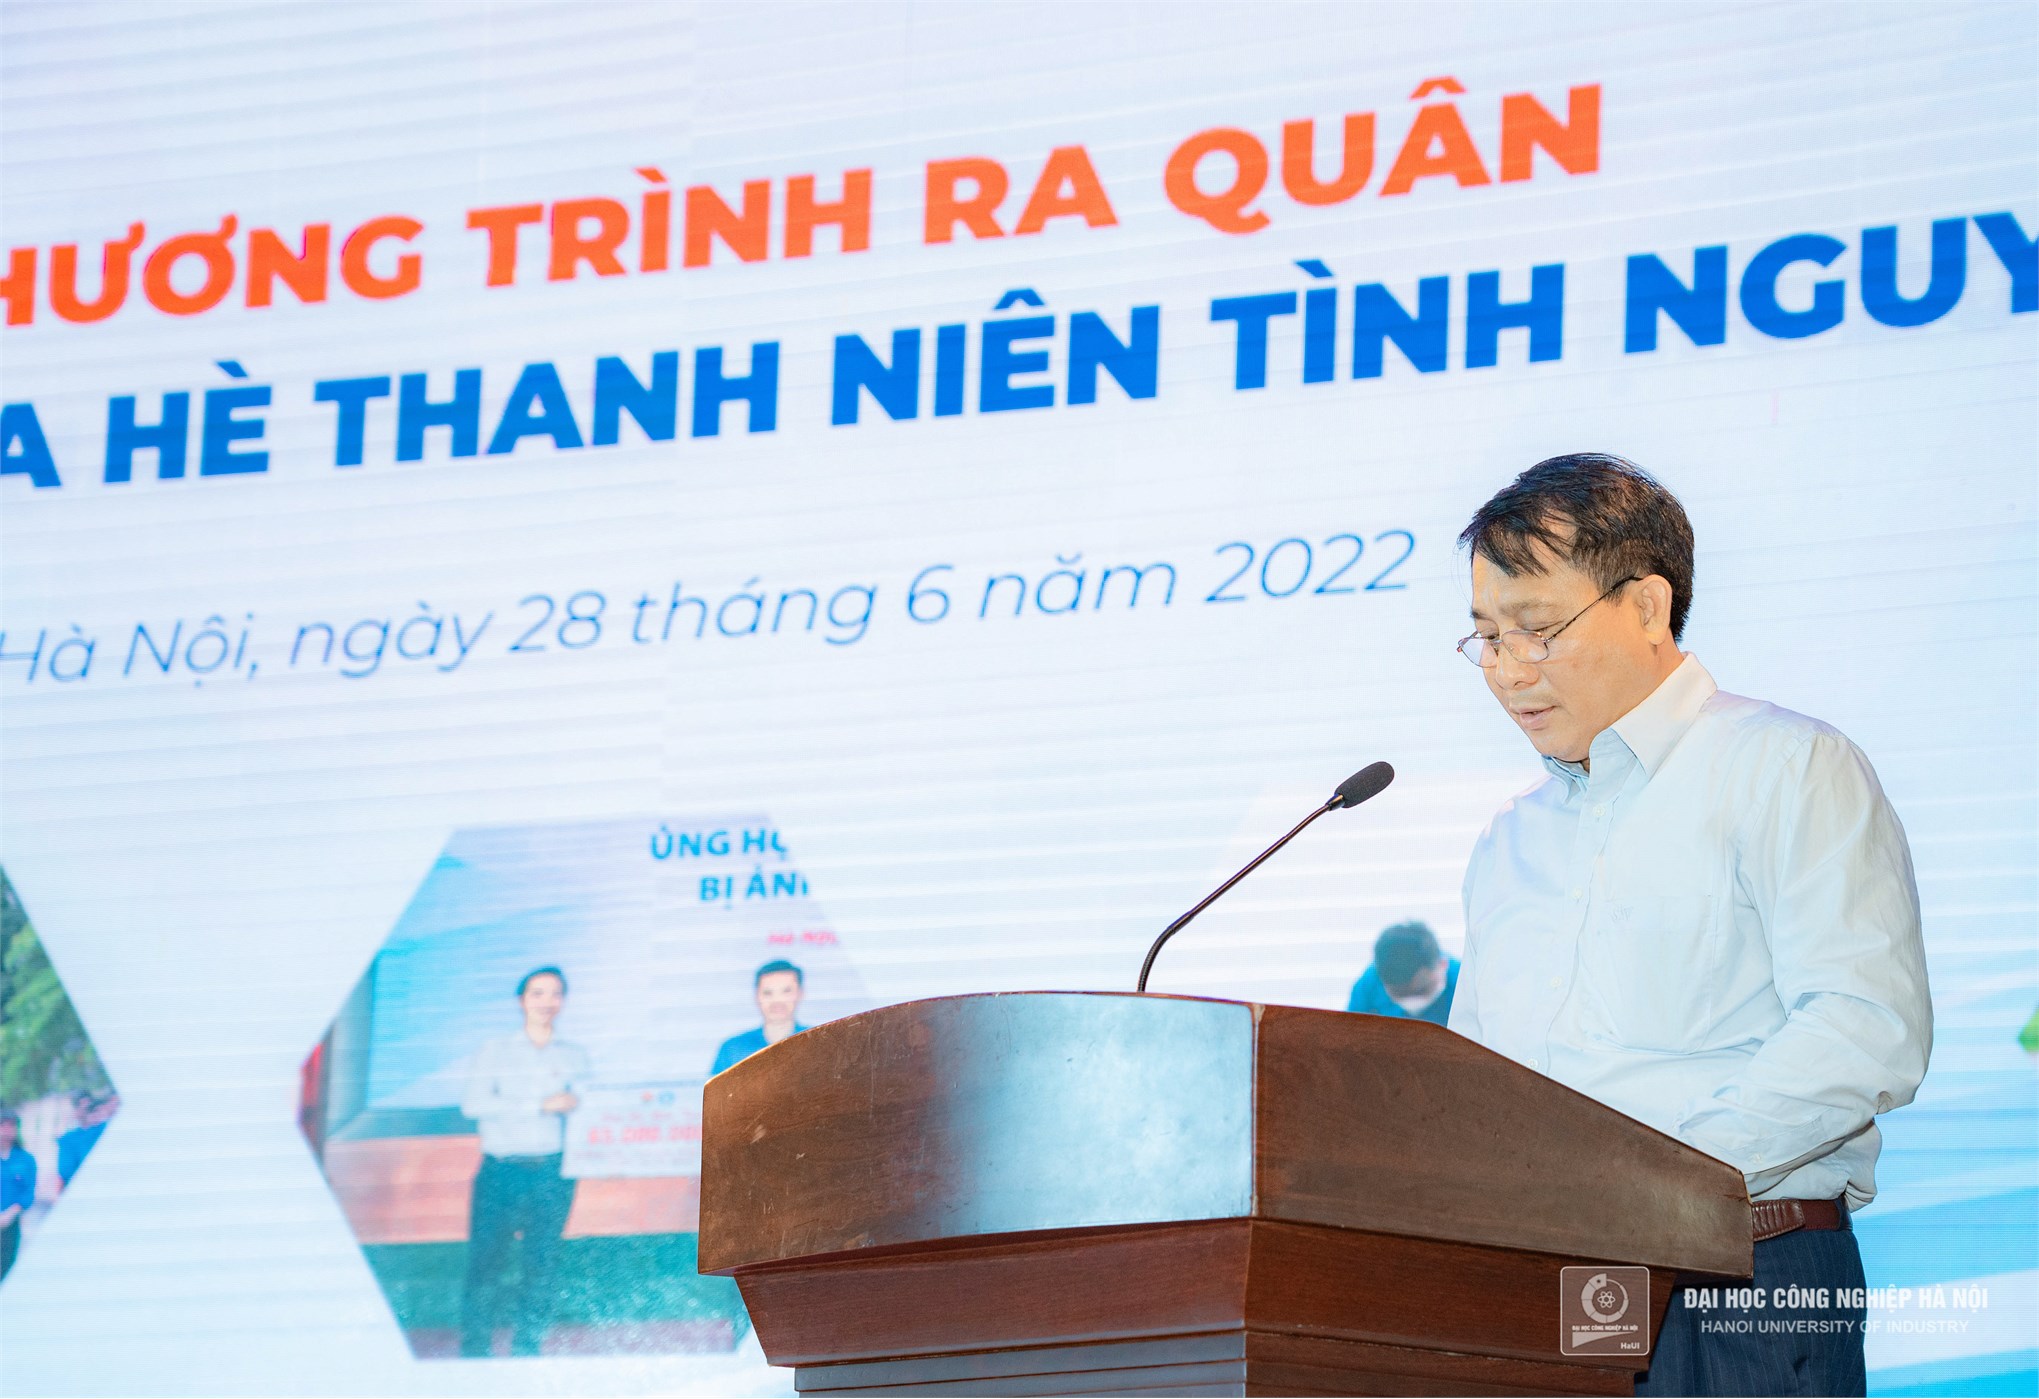 The Youth of Hanoi University of Industry launched the 2022 Summer Youth Volunteer Campaign